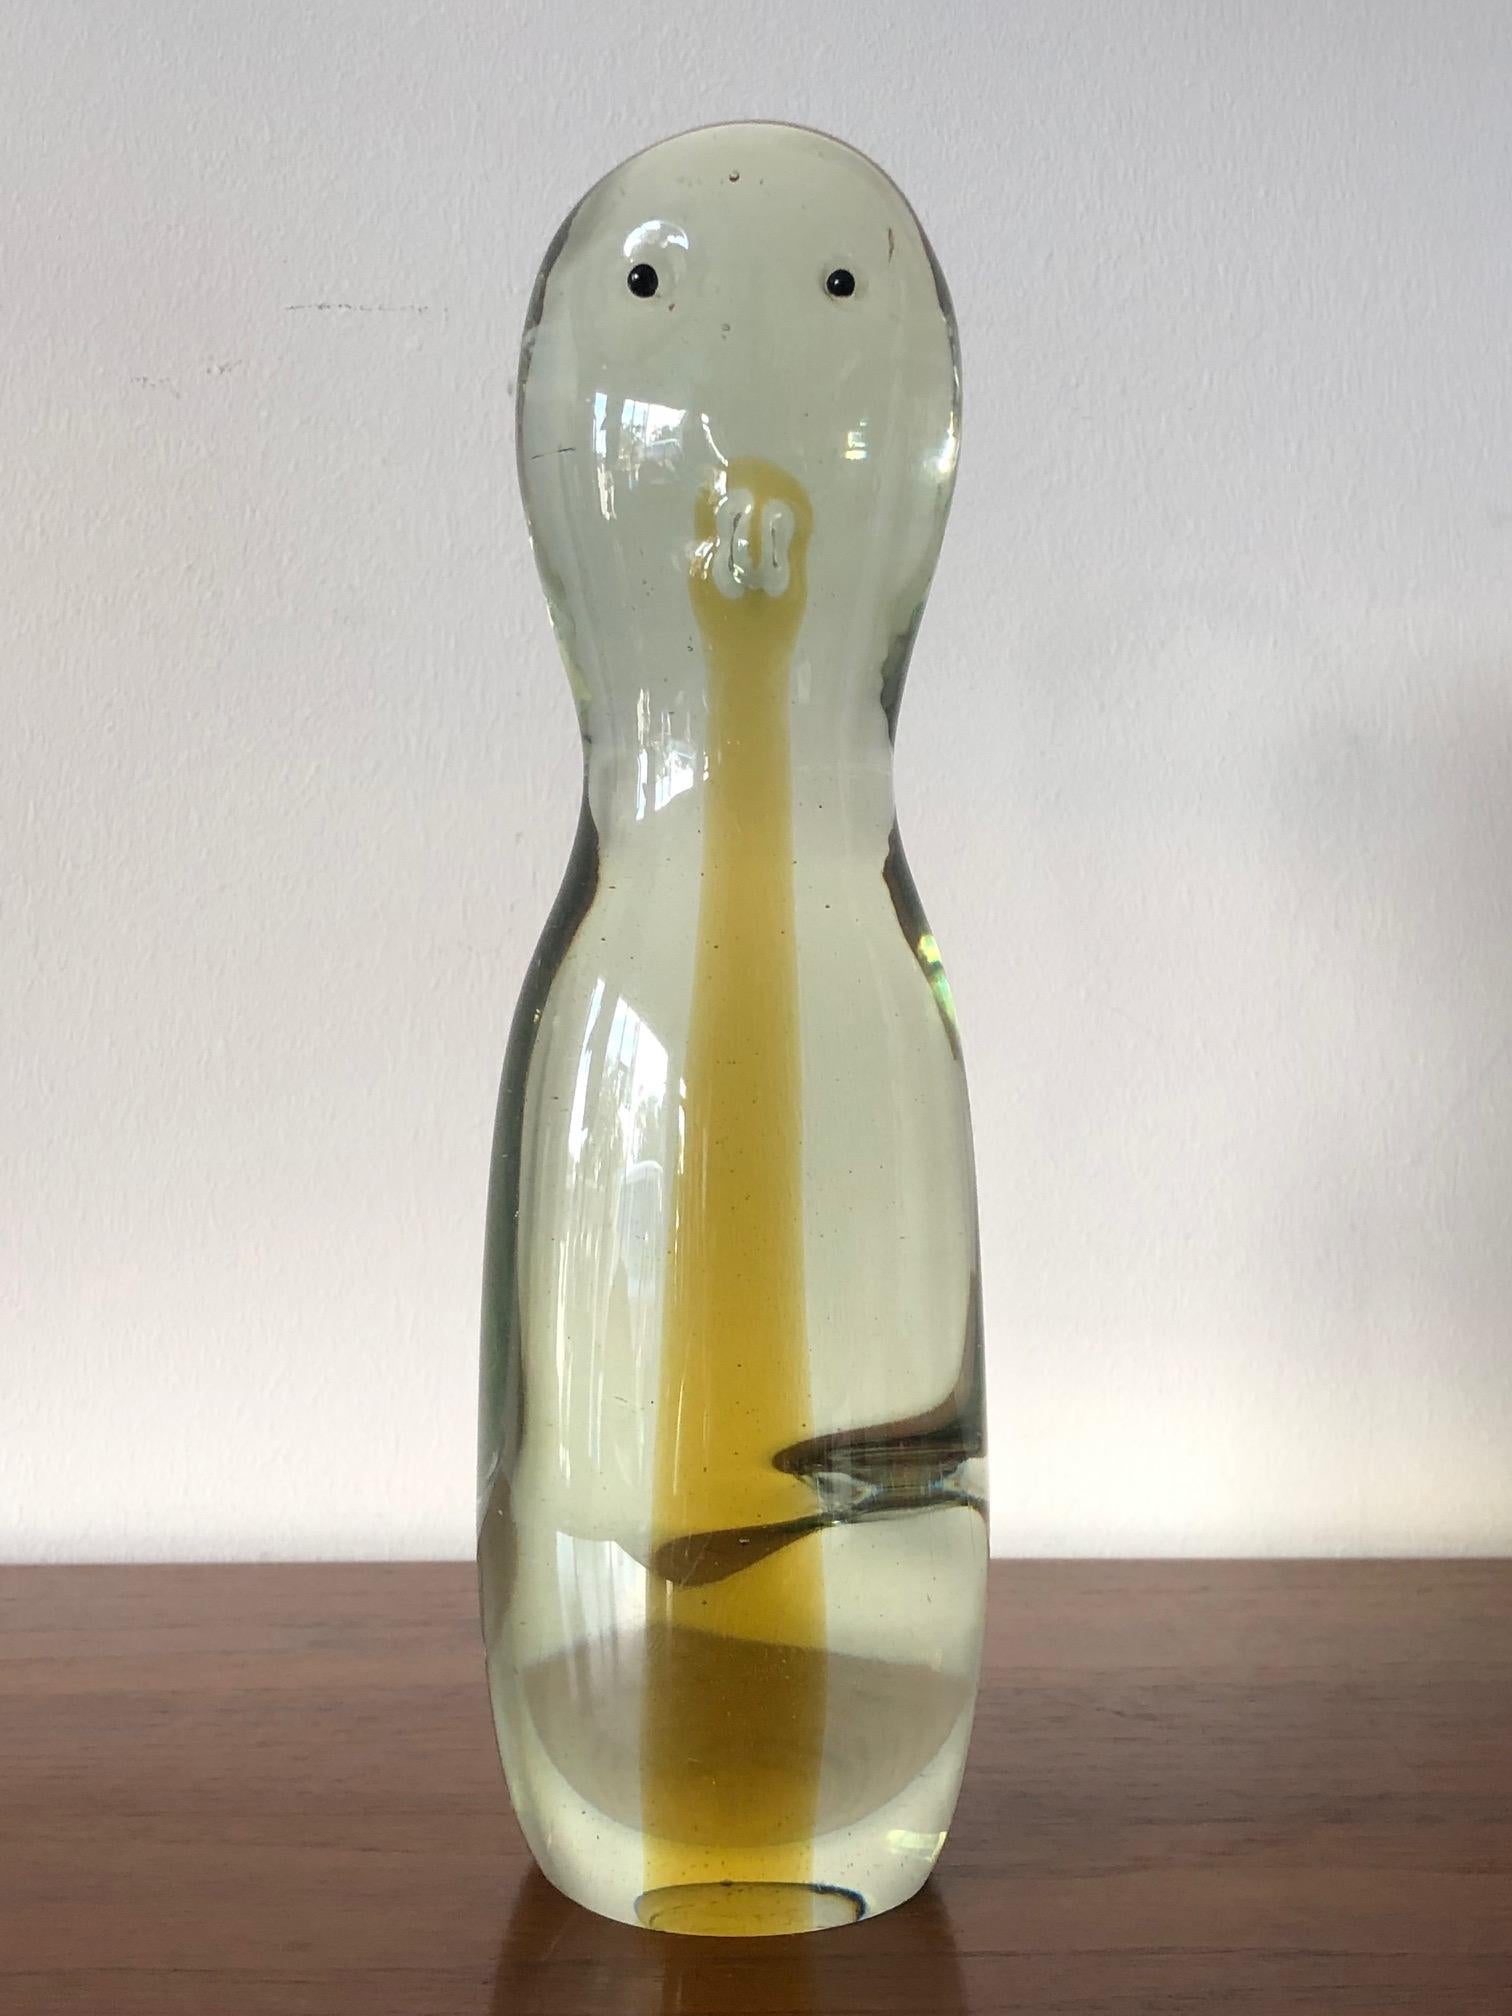 An unusual Cenedese Antonio da Ros glass sculpture. Abstract penguin, very curious with yellow stripe in the centre.